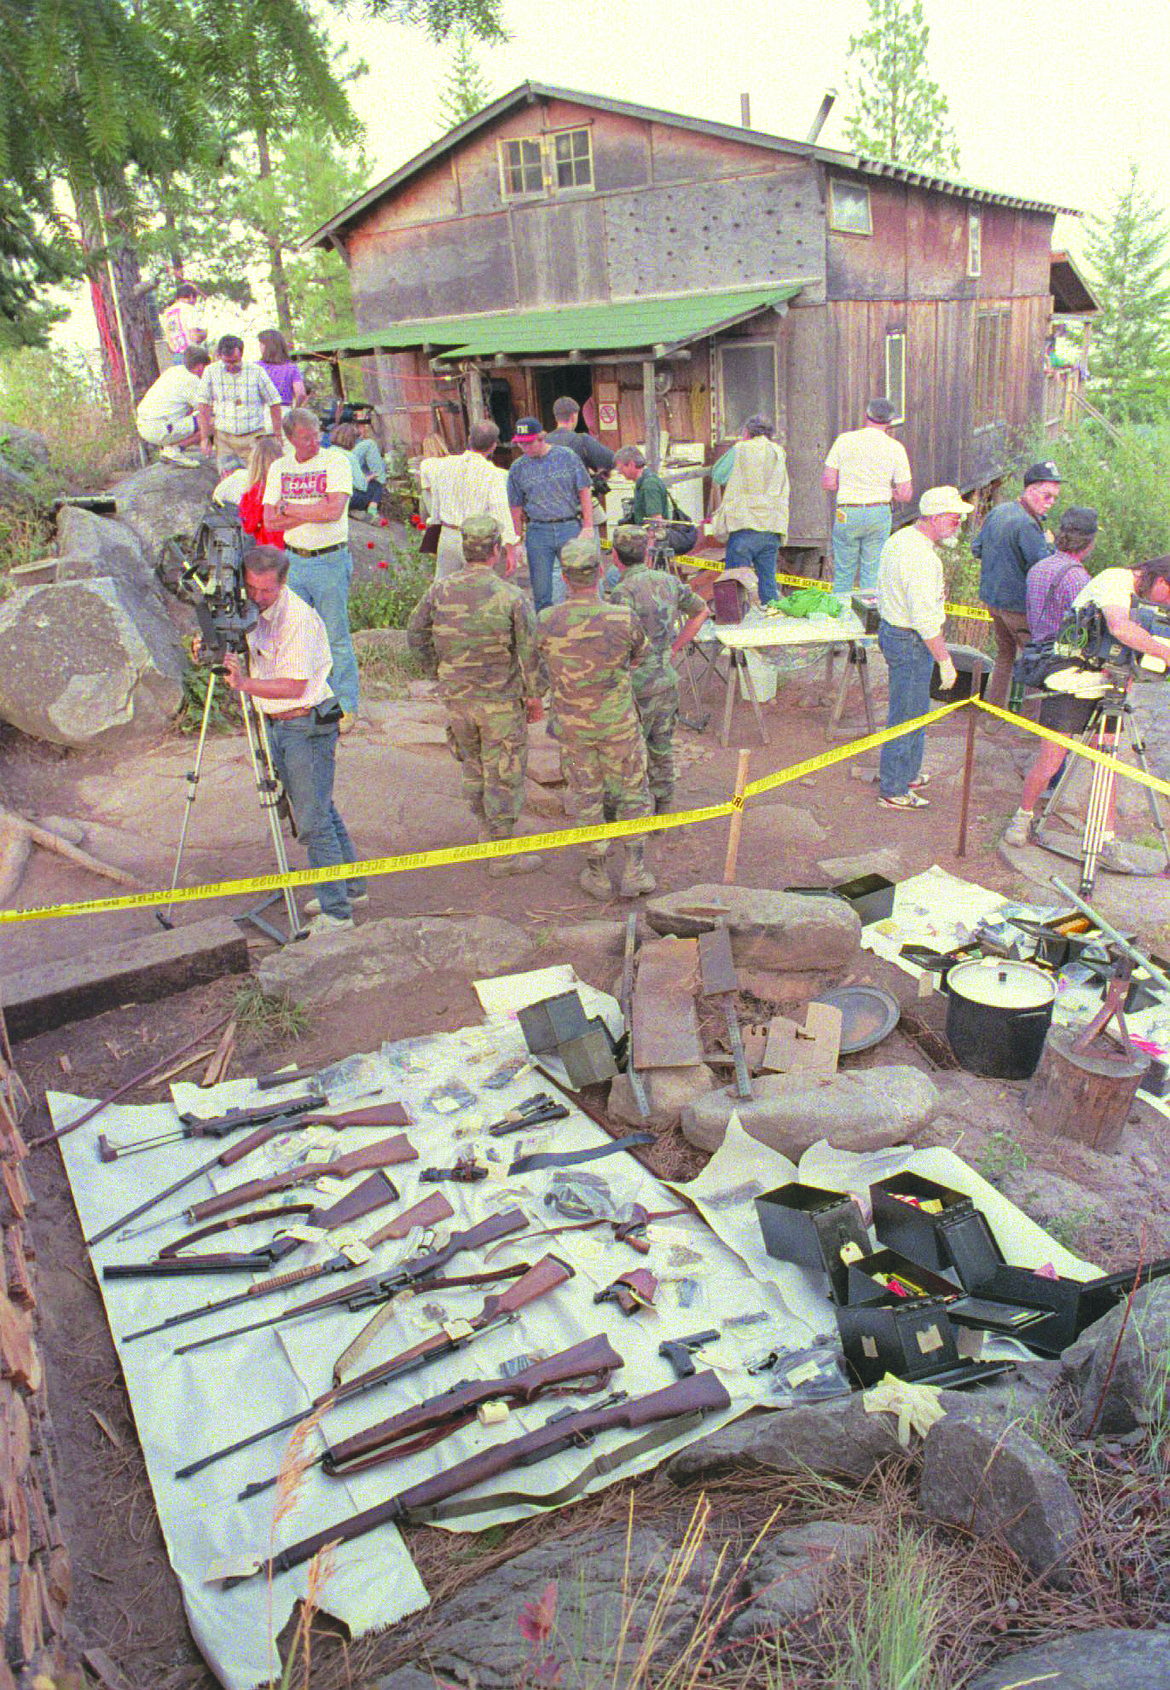 n this Sept. 1, 1992, file photo, media members and federal agents tour the outside of Randy Weaver's home near Naples, Idaho.It's been a quarter century since a standoff in the remote mountains of northern Idaho left a 14-year-old boy, his mother and a federal agent dead and sparked the expansion of radical right-wing groups across the country that continues to this day.